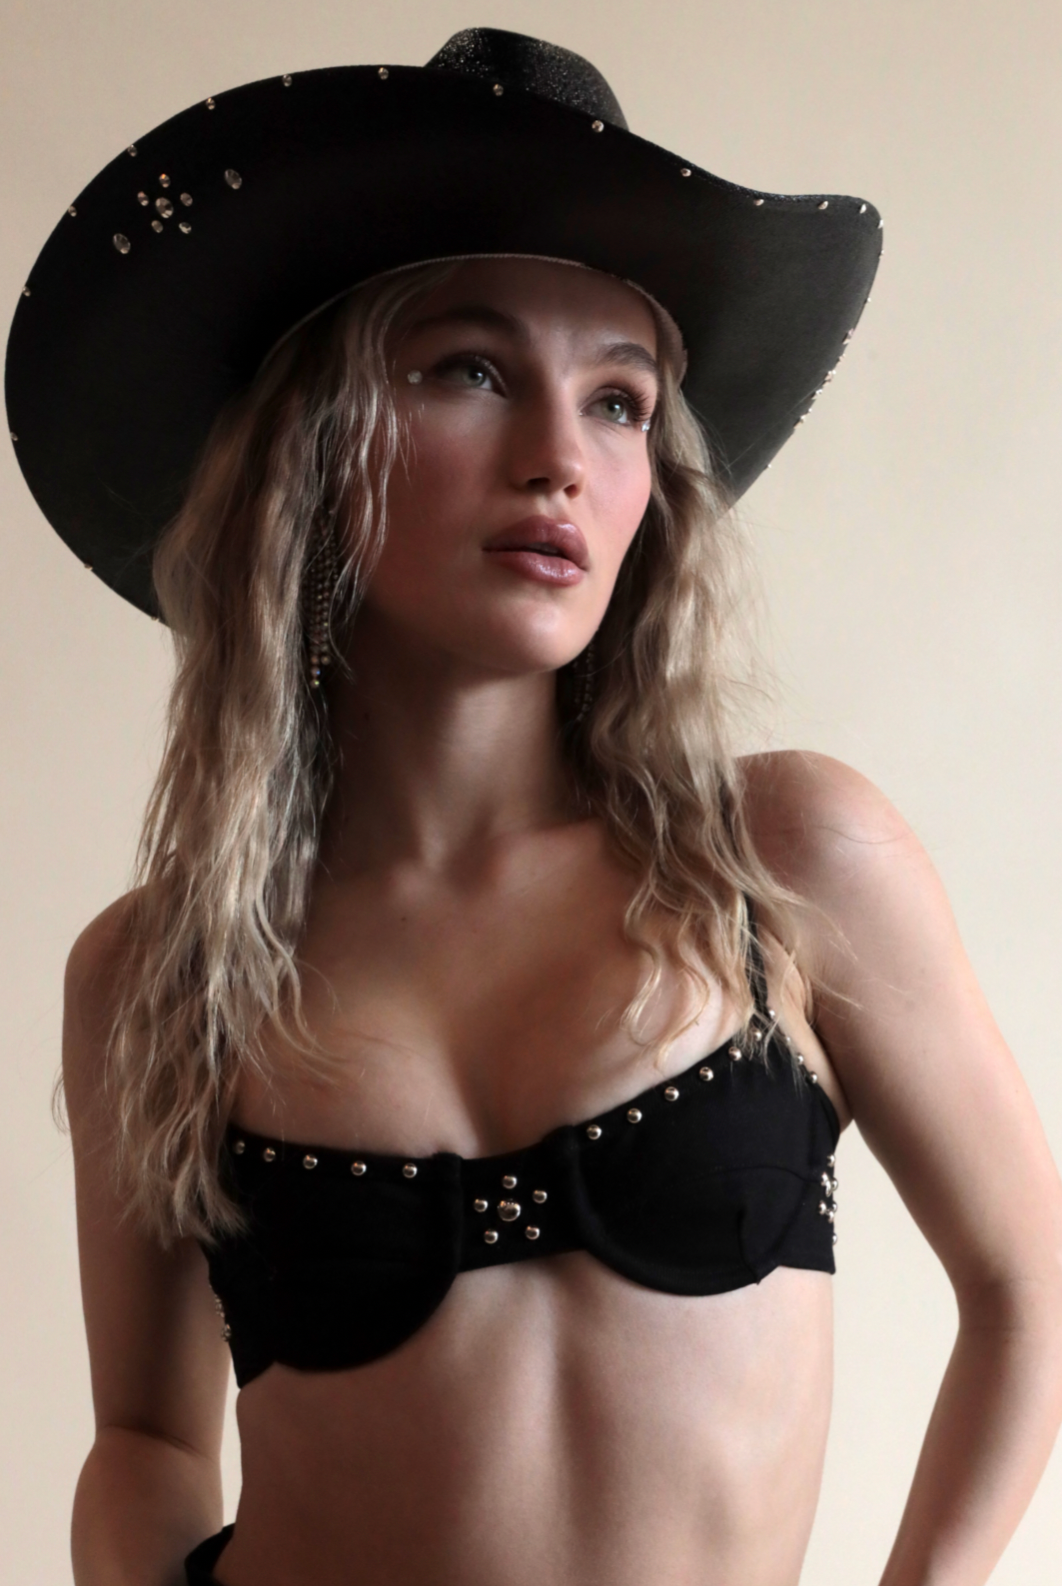 Black cowboy hat with metallic jewels paired with denim grommeted bra.